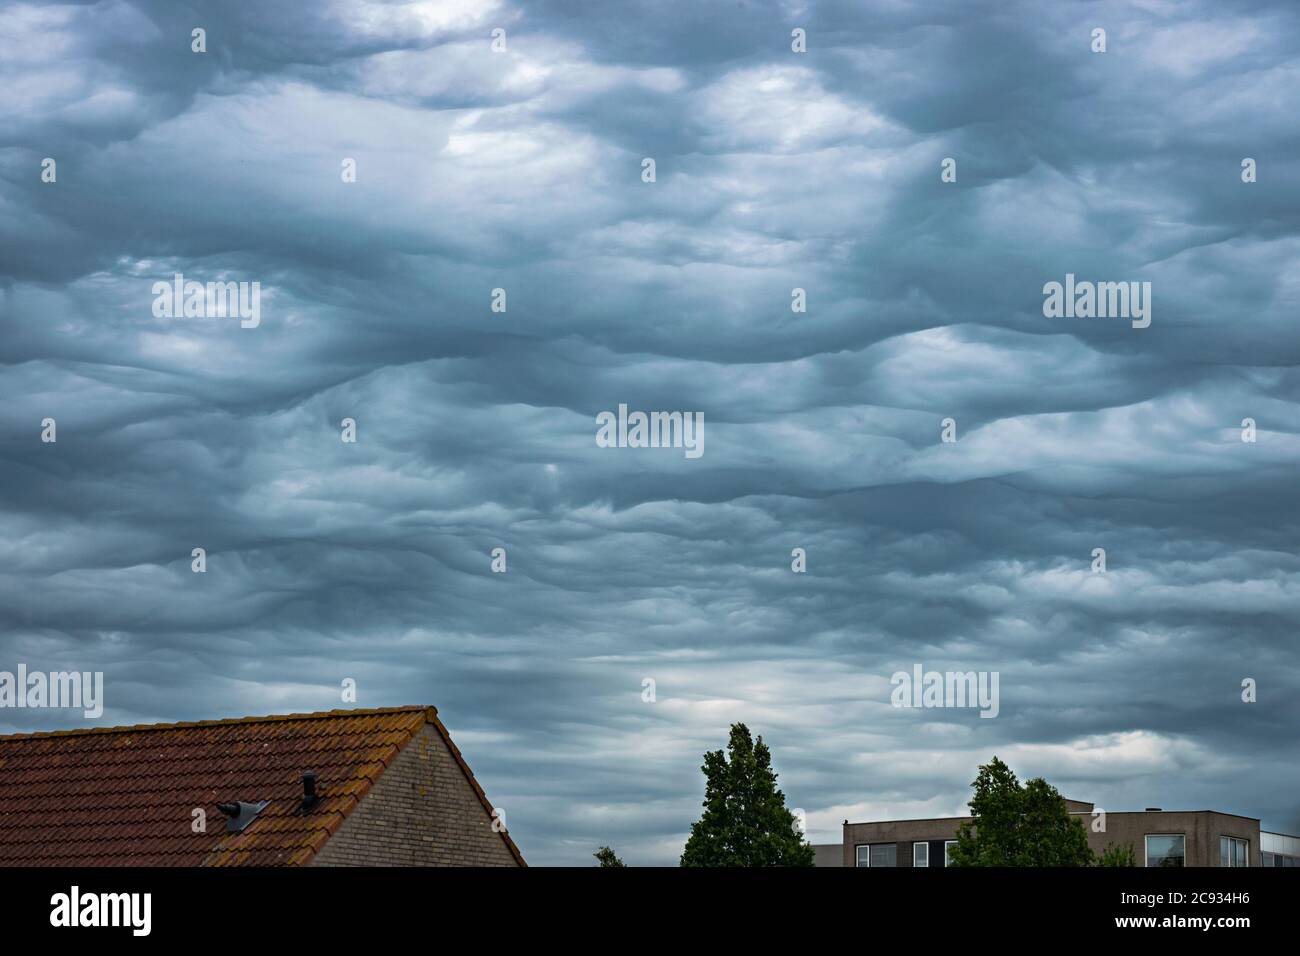 Chaotic sky with bubble clouds. Scientific name of the clouds is altocumulus undulatus asperitas. Stock Photo